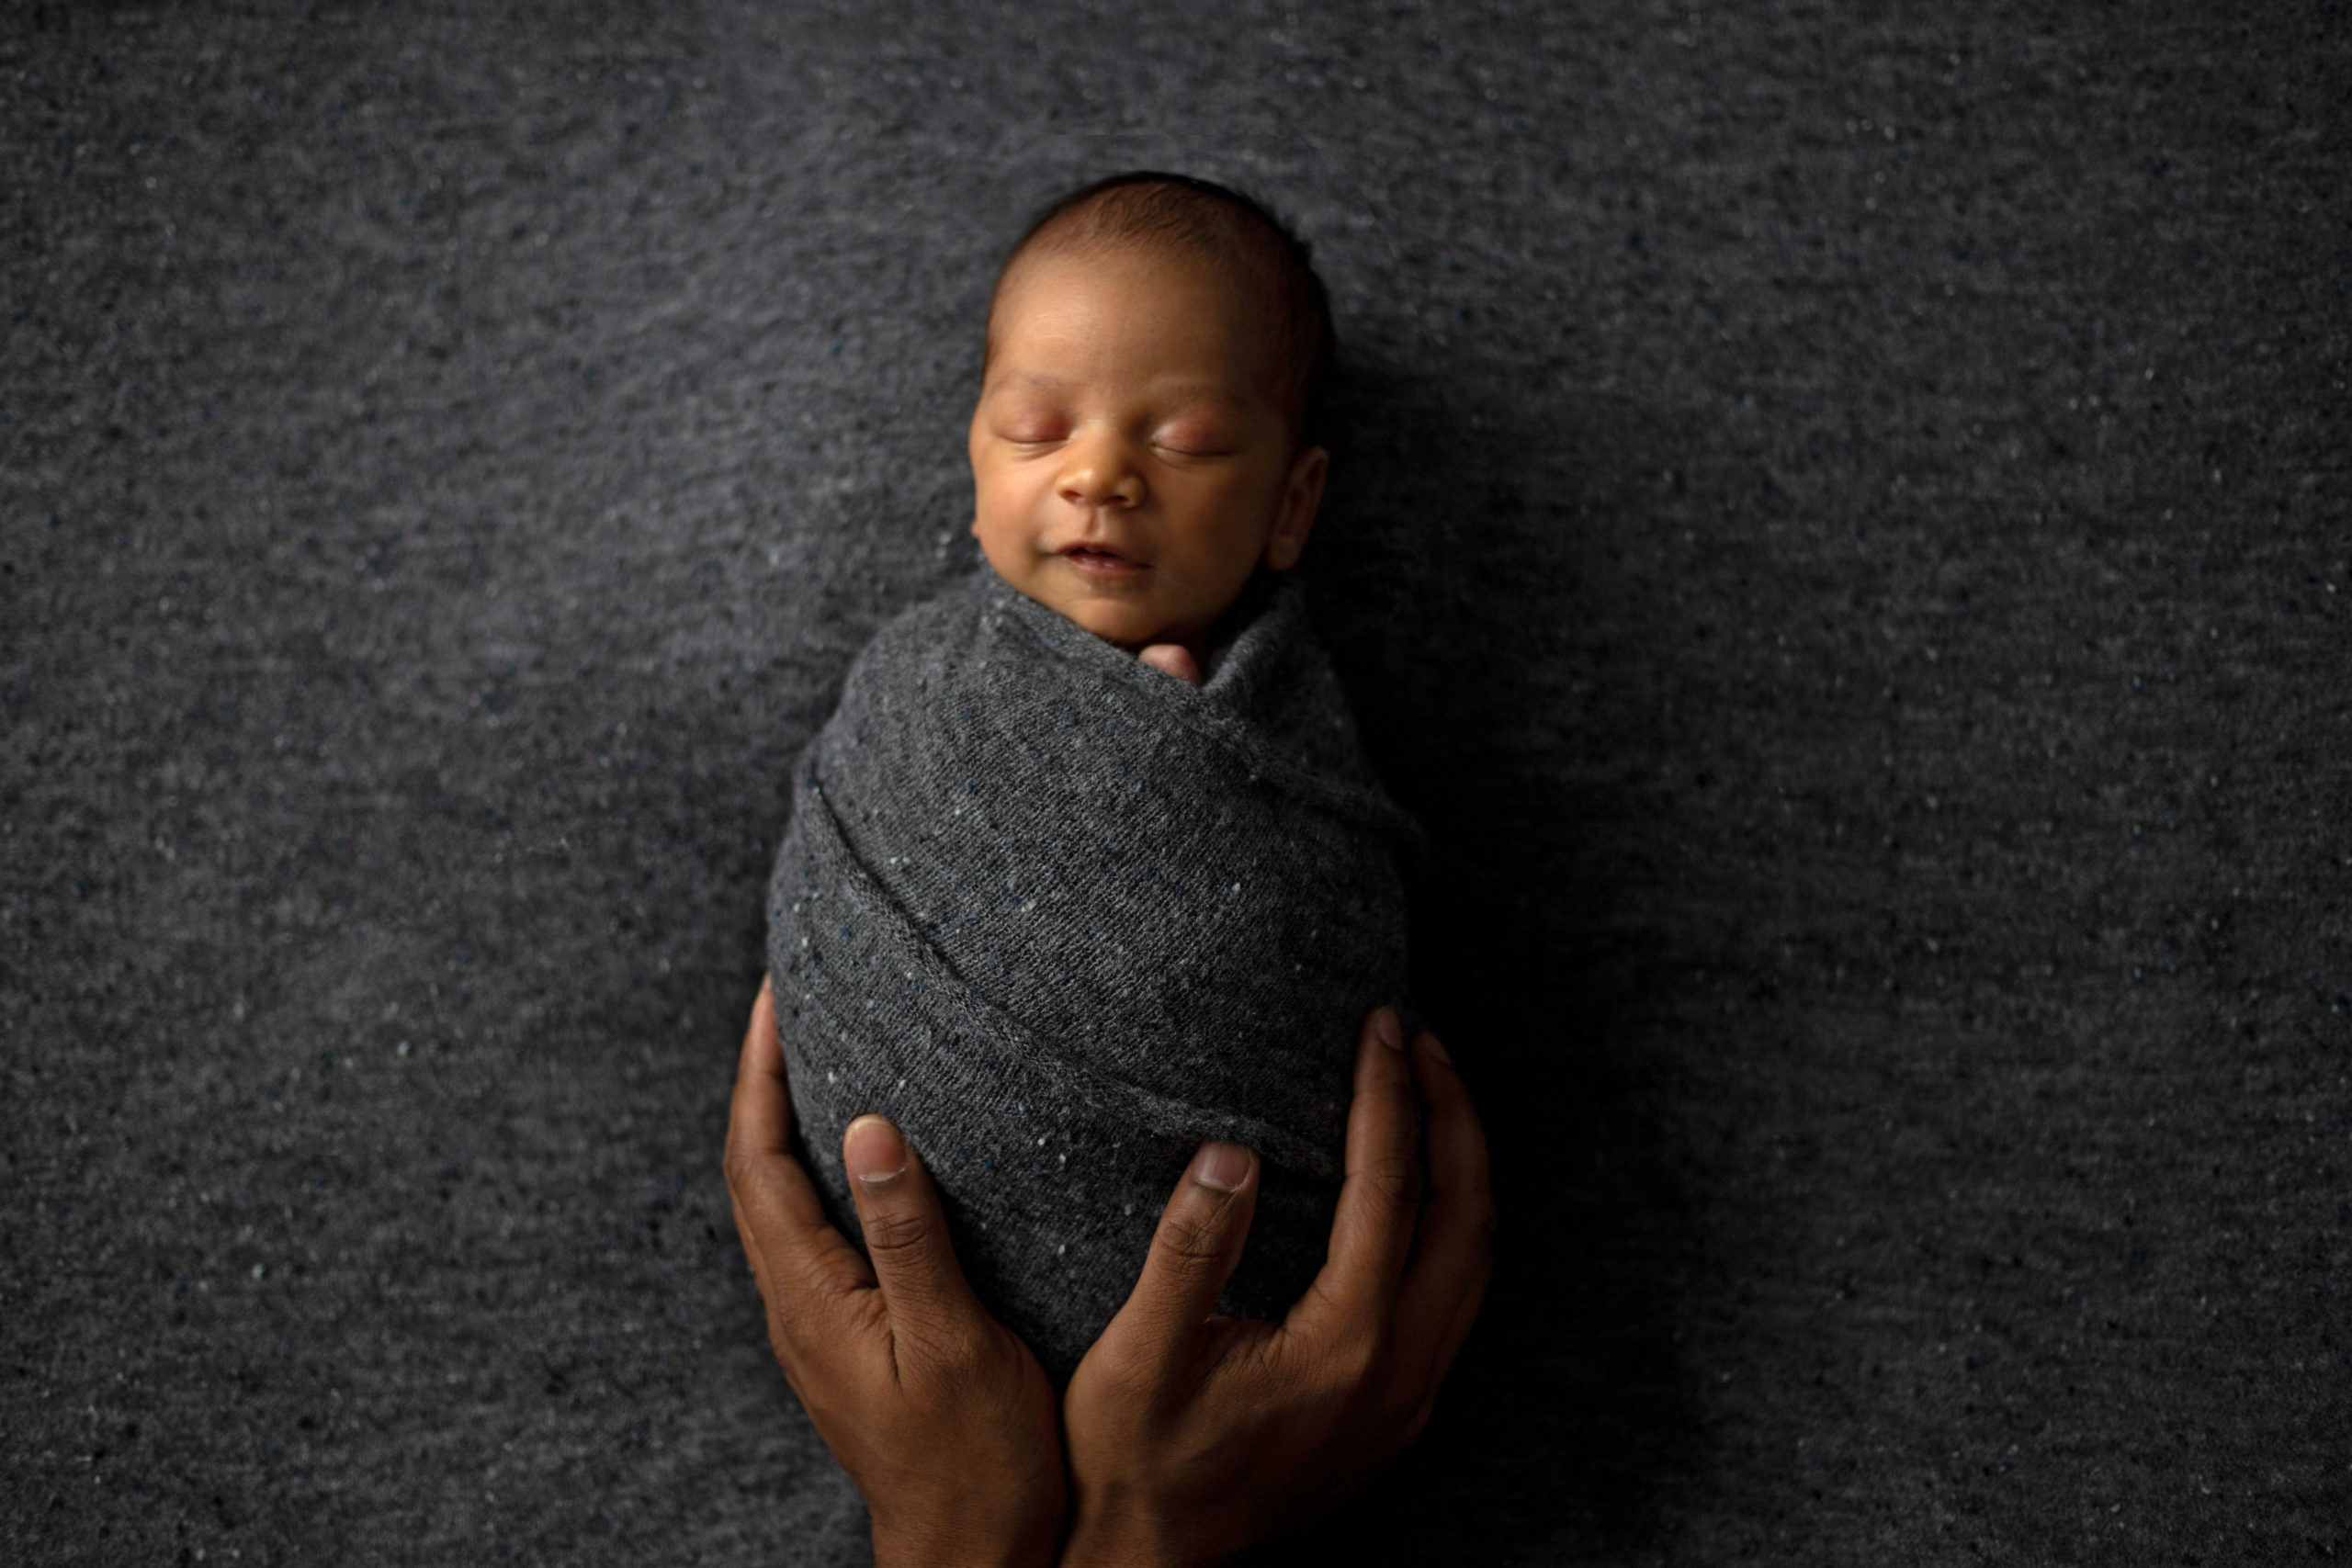 This image shows a swaddled baby being held by his dad's hands.